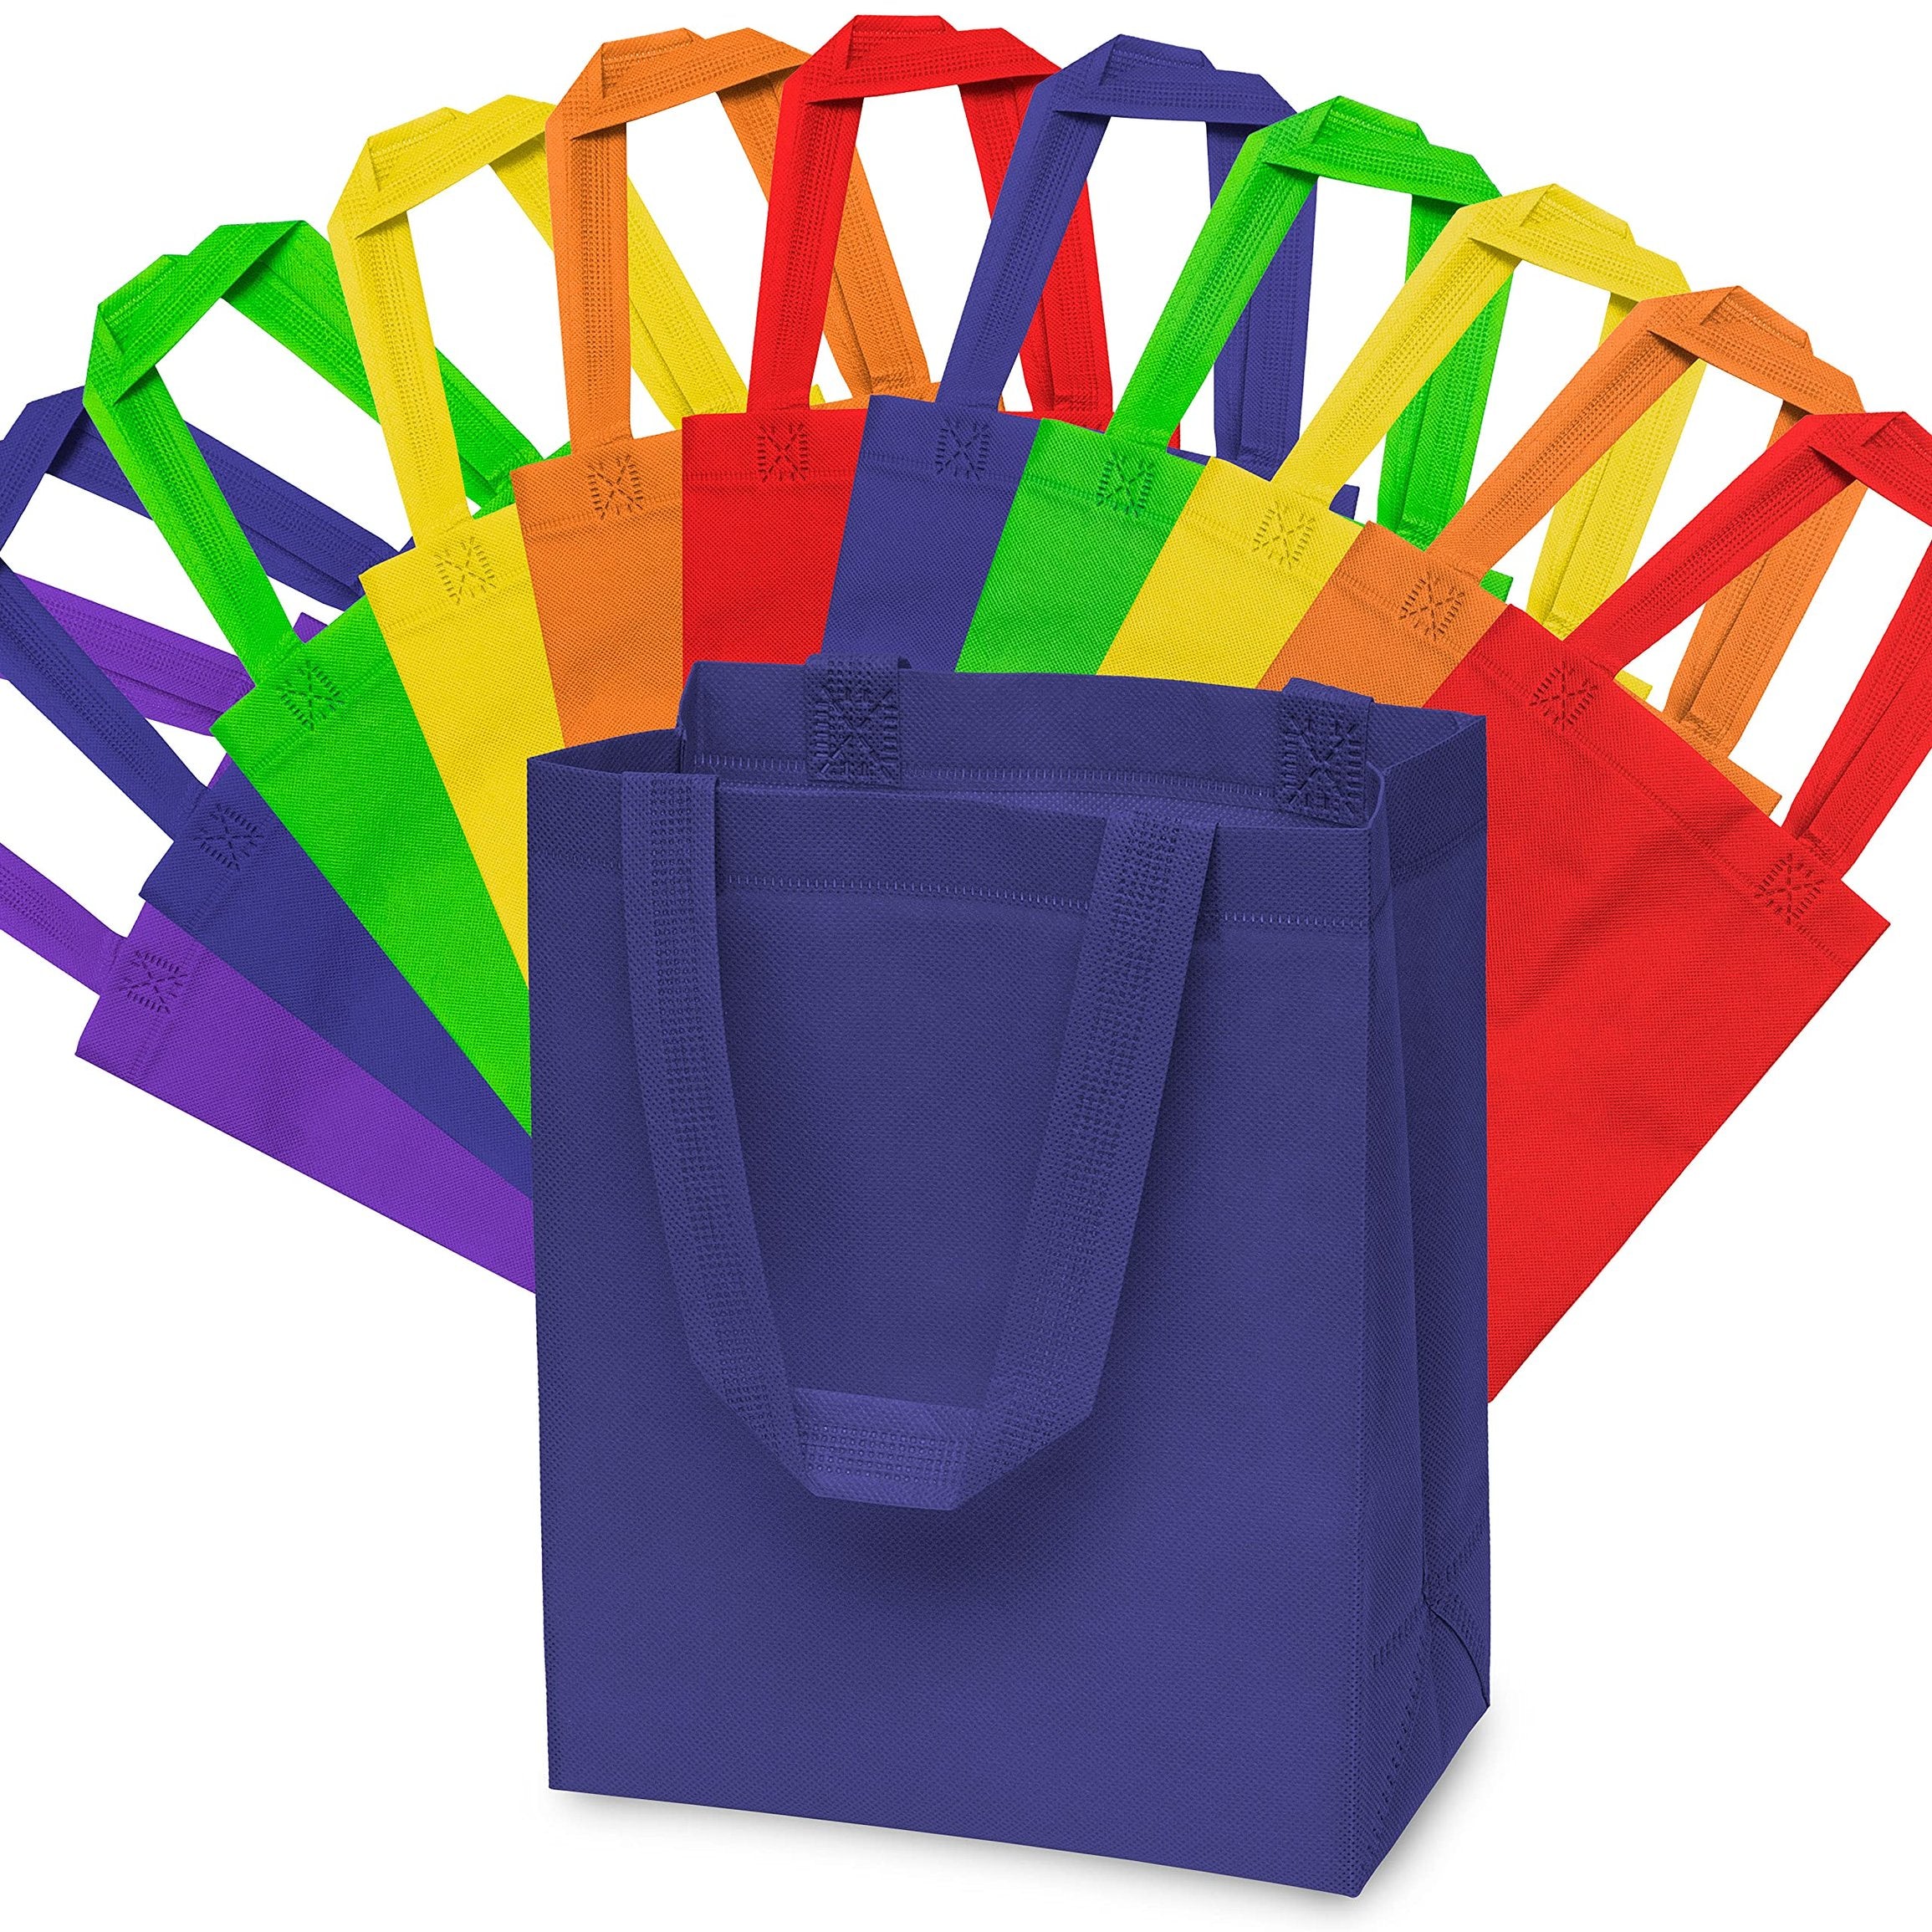 Reusable Gift Bags 12 Pack Small Totes Handles Eco-Friendly Assorted Colors 8x4x10 Inch